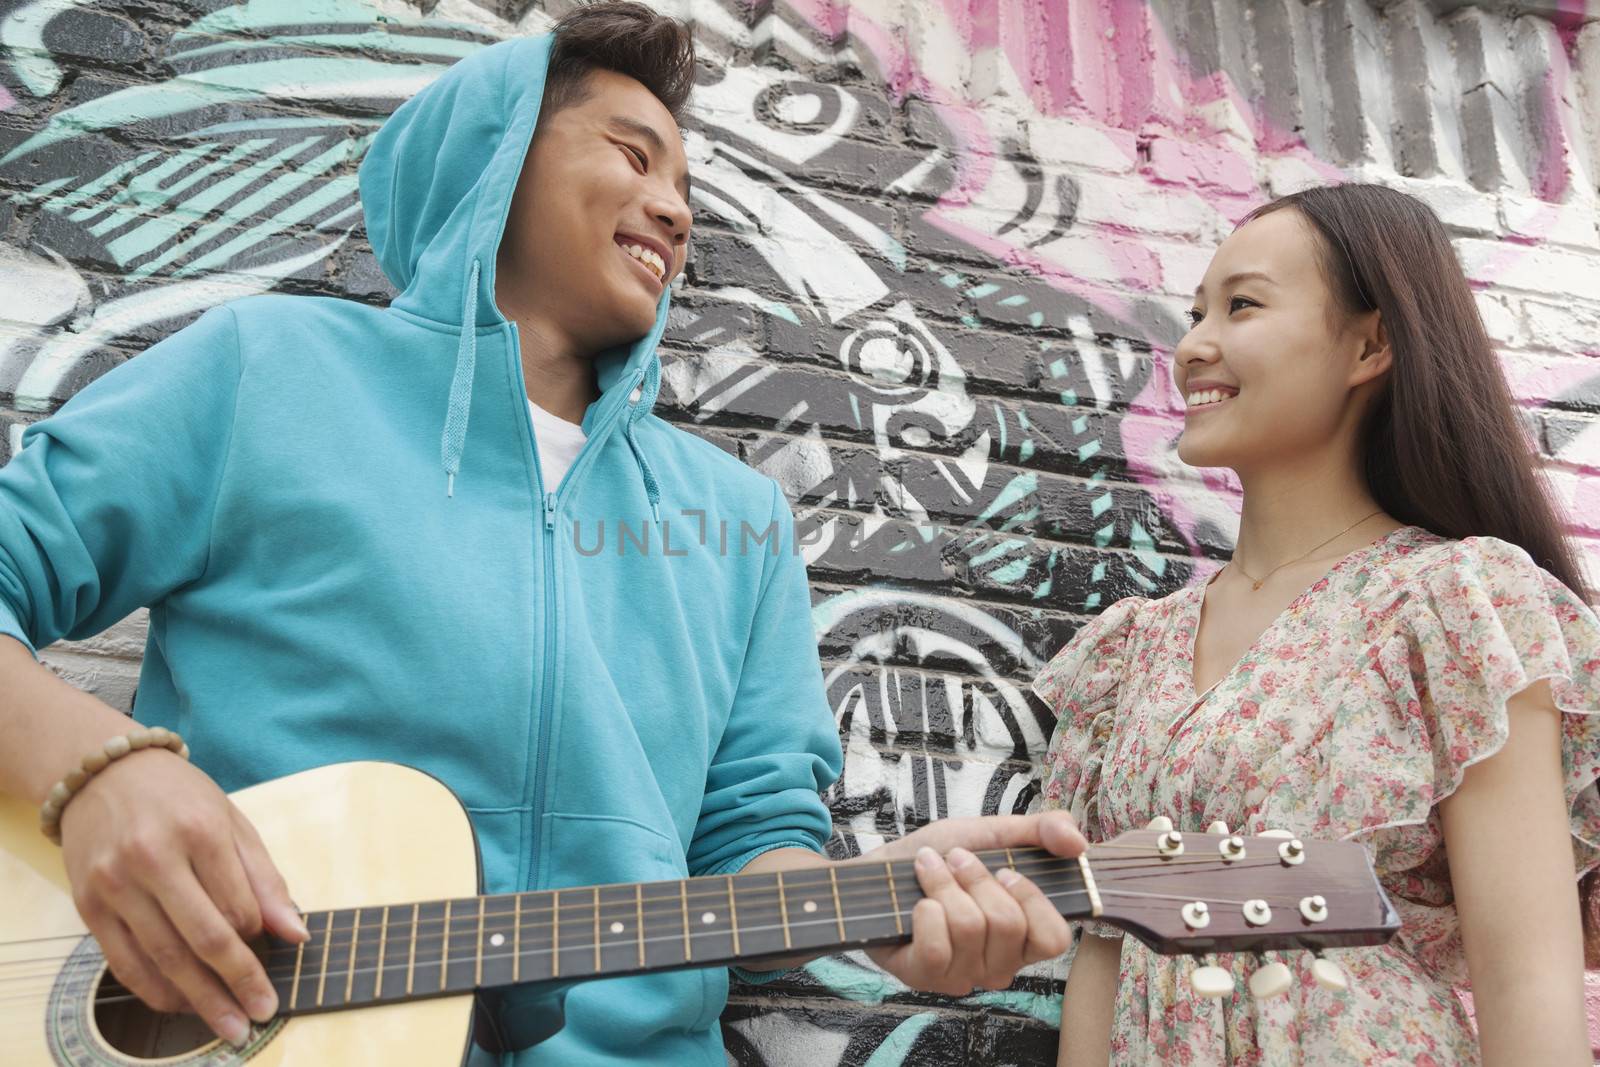 Young smiling street musician leaning on a wall with graffiti drawings, playing his guitar, and flirting with a young woman in a dress